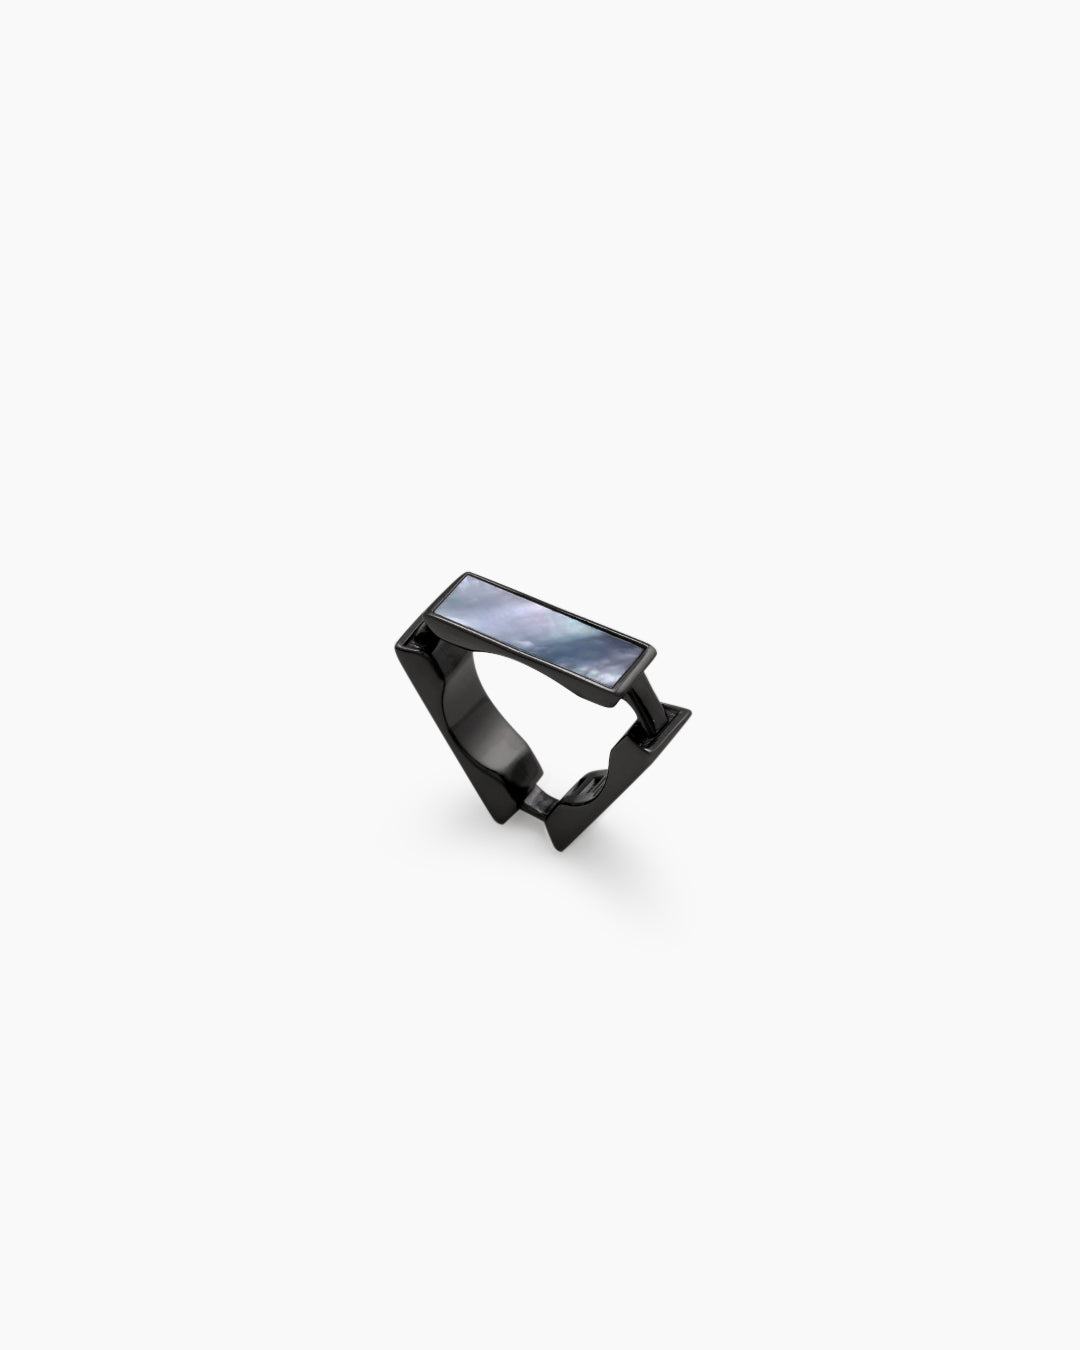 Montage Ring_Large_Black-Plated, White